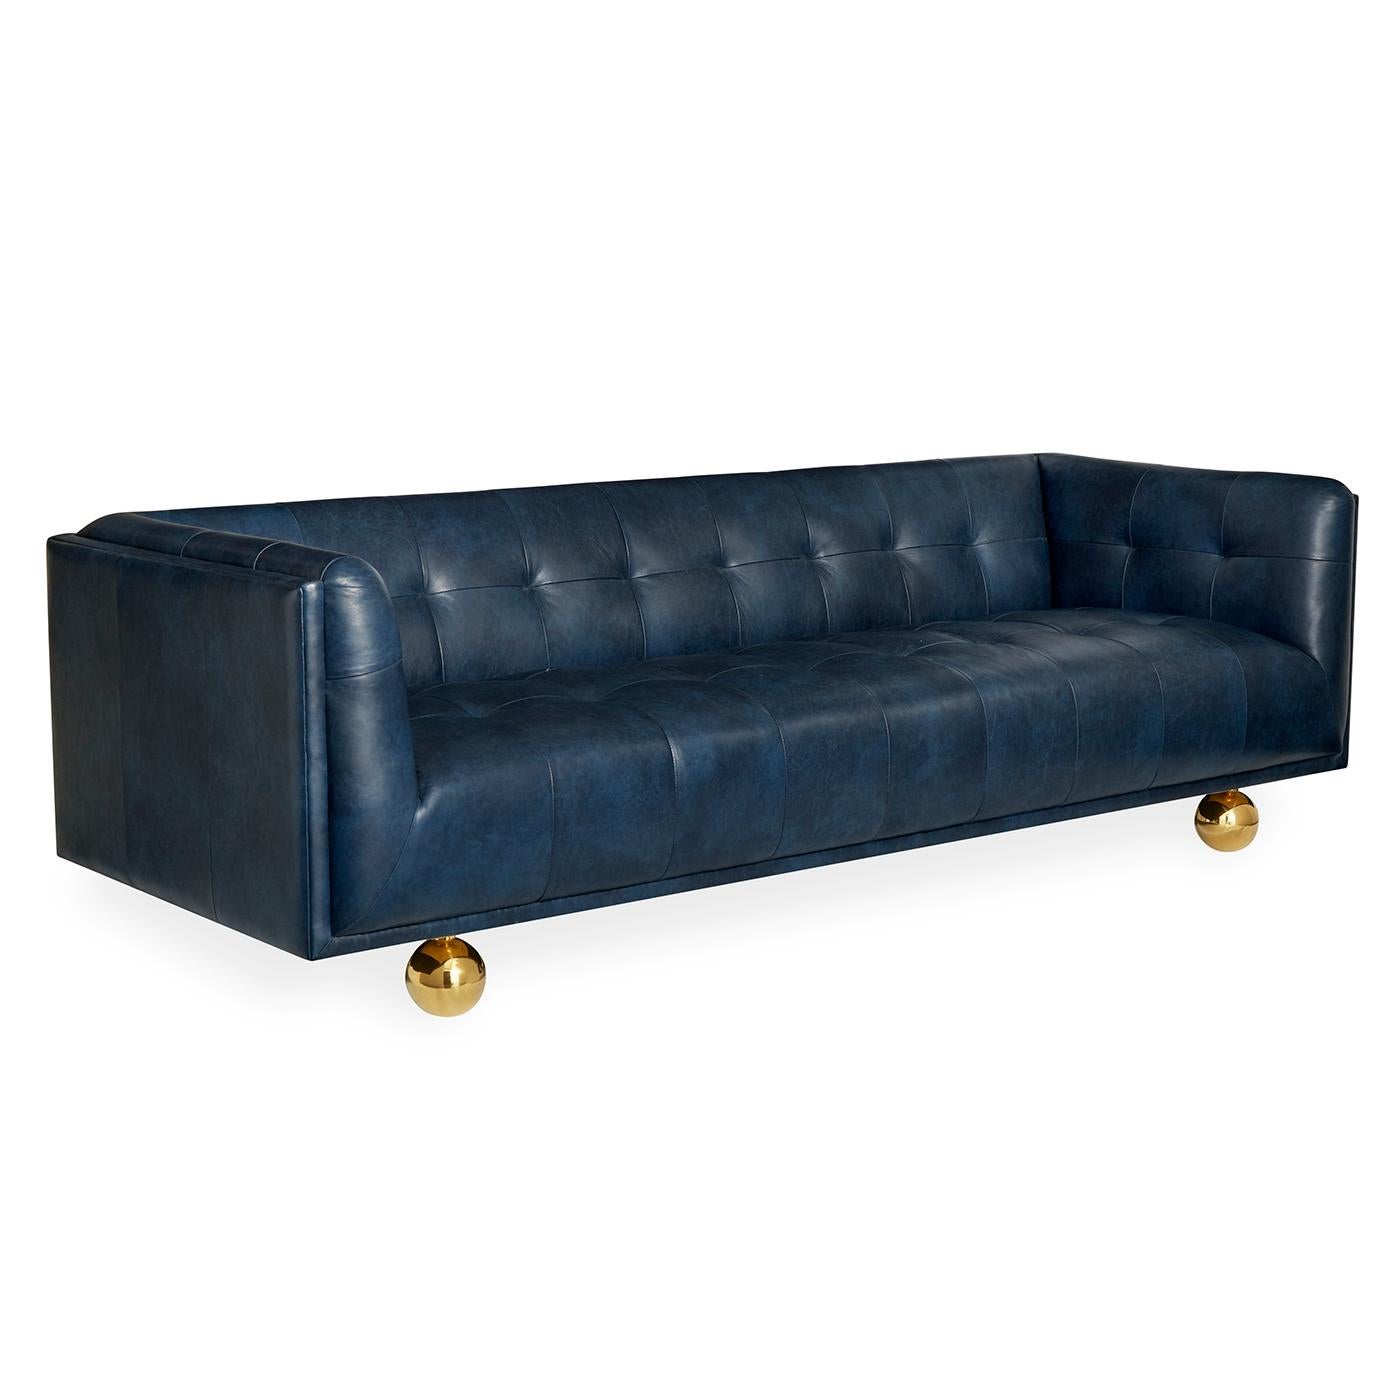 21st Century comfort. Our spin on the Classic Chesterfield. We took the original profile—clubby comfort, tailored tufting—and made it modern with a pared down silhouette. The finishing touch: oversized (and ultra-glam) brass orbs in place of